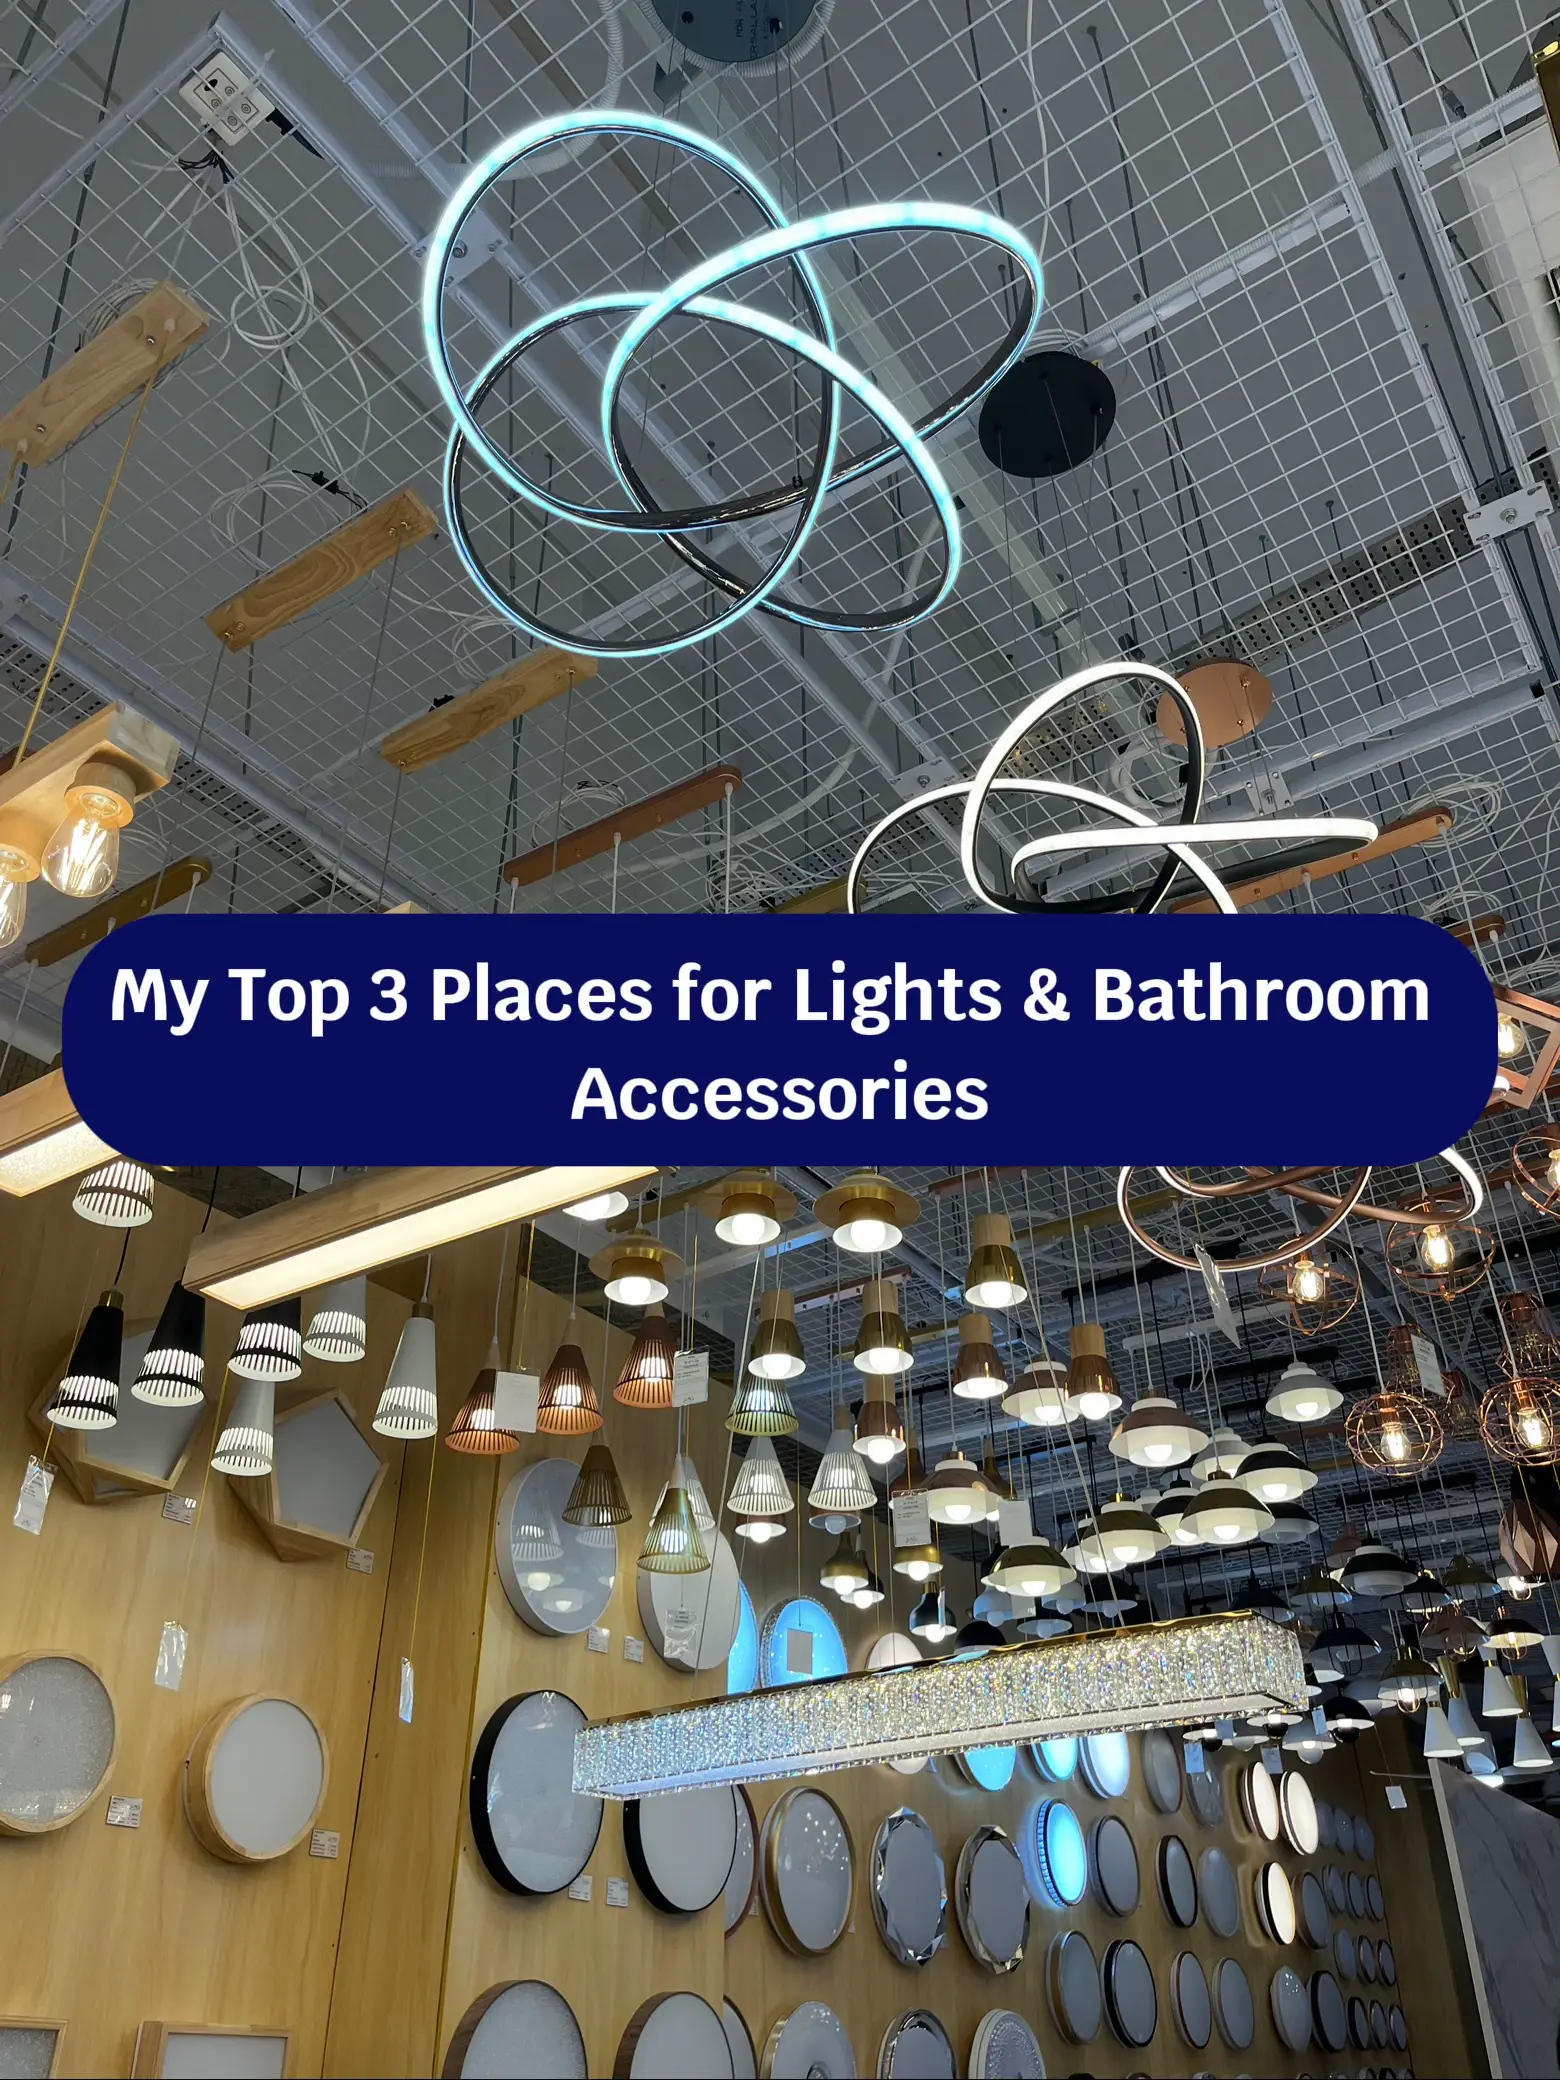 My Top 3 Places for Lights & Bathroom Accessories💡's images